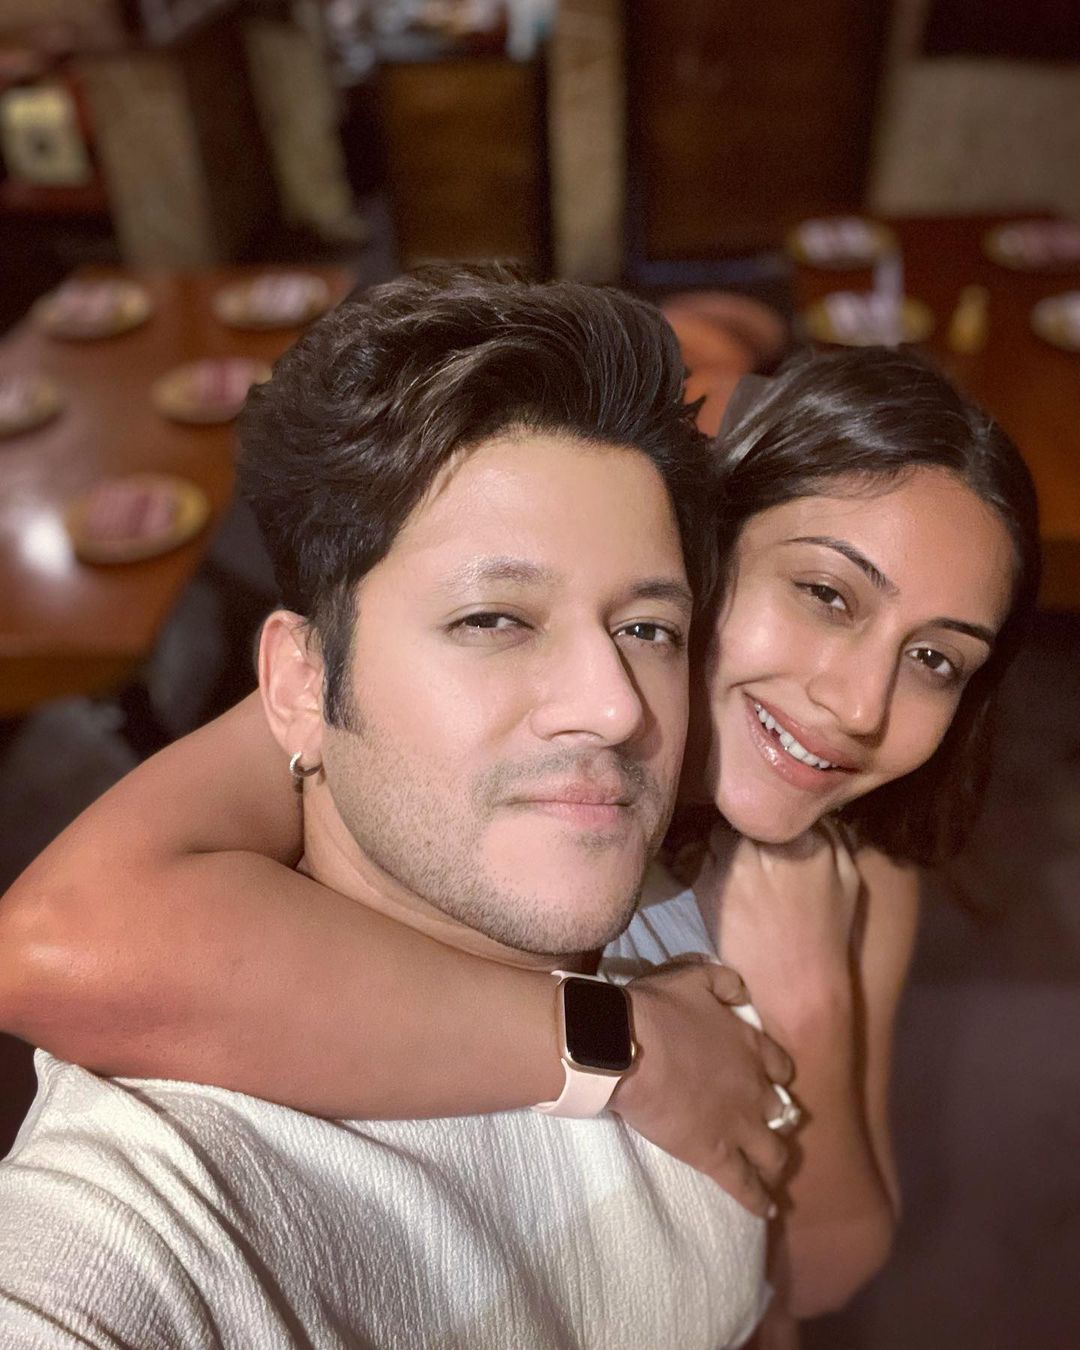 Surbhi Chandna Was Spotted At A Temple With Her Long-Time Boyfriend Karan To Seek Blessings. The Duo has Already Started Their Wedding Preparations Already!